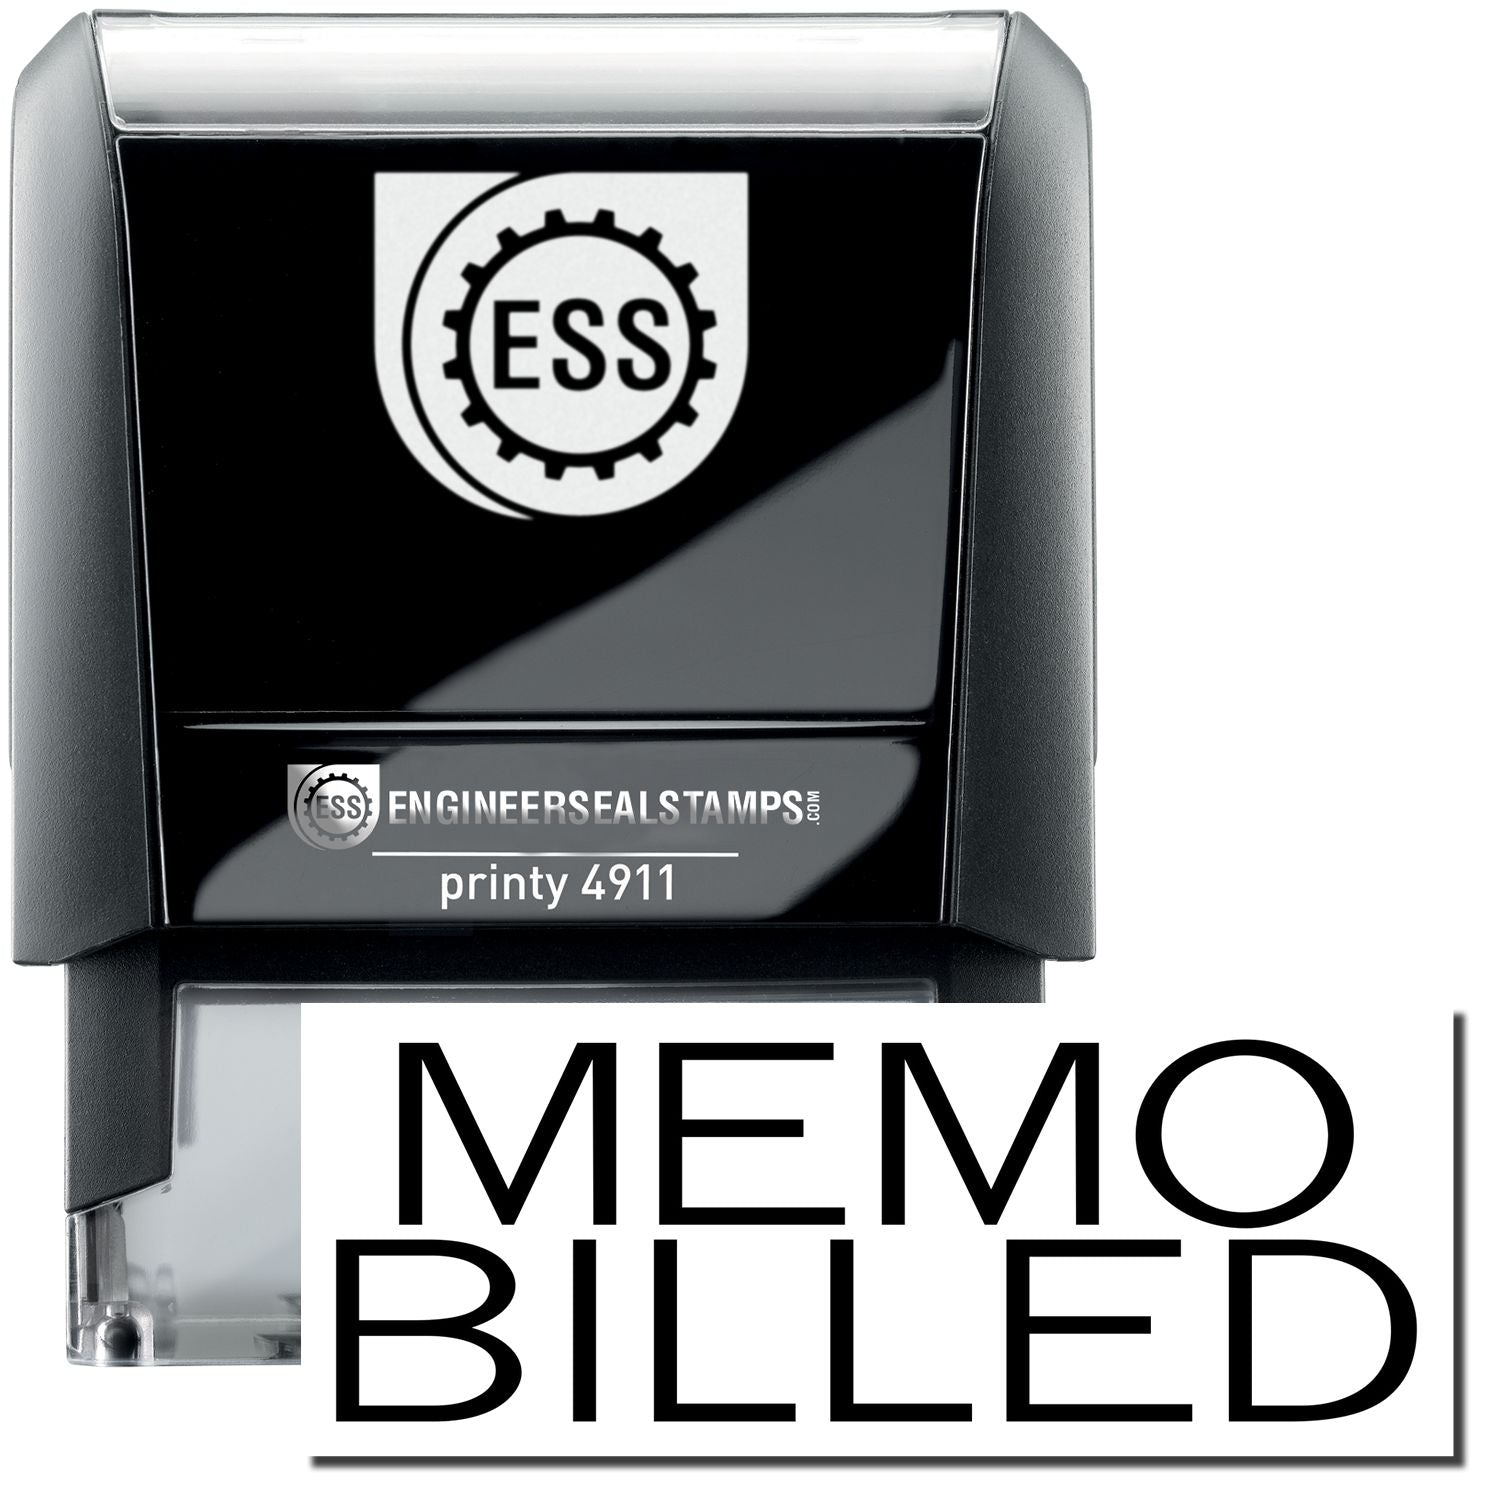 A self-inking stamp with a stamped image showing how the text "MEMO BILLED" is displayed after stamping.